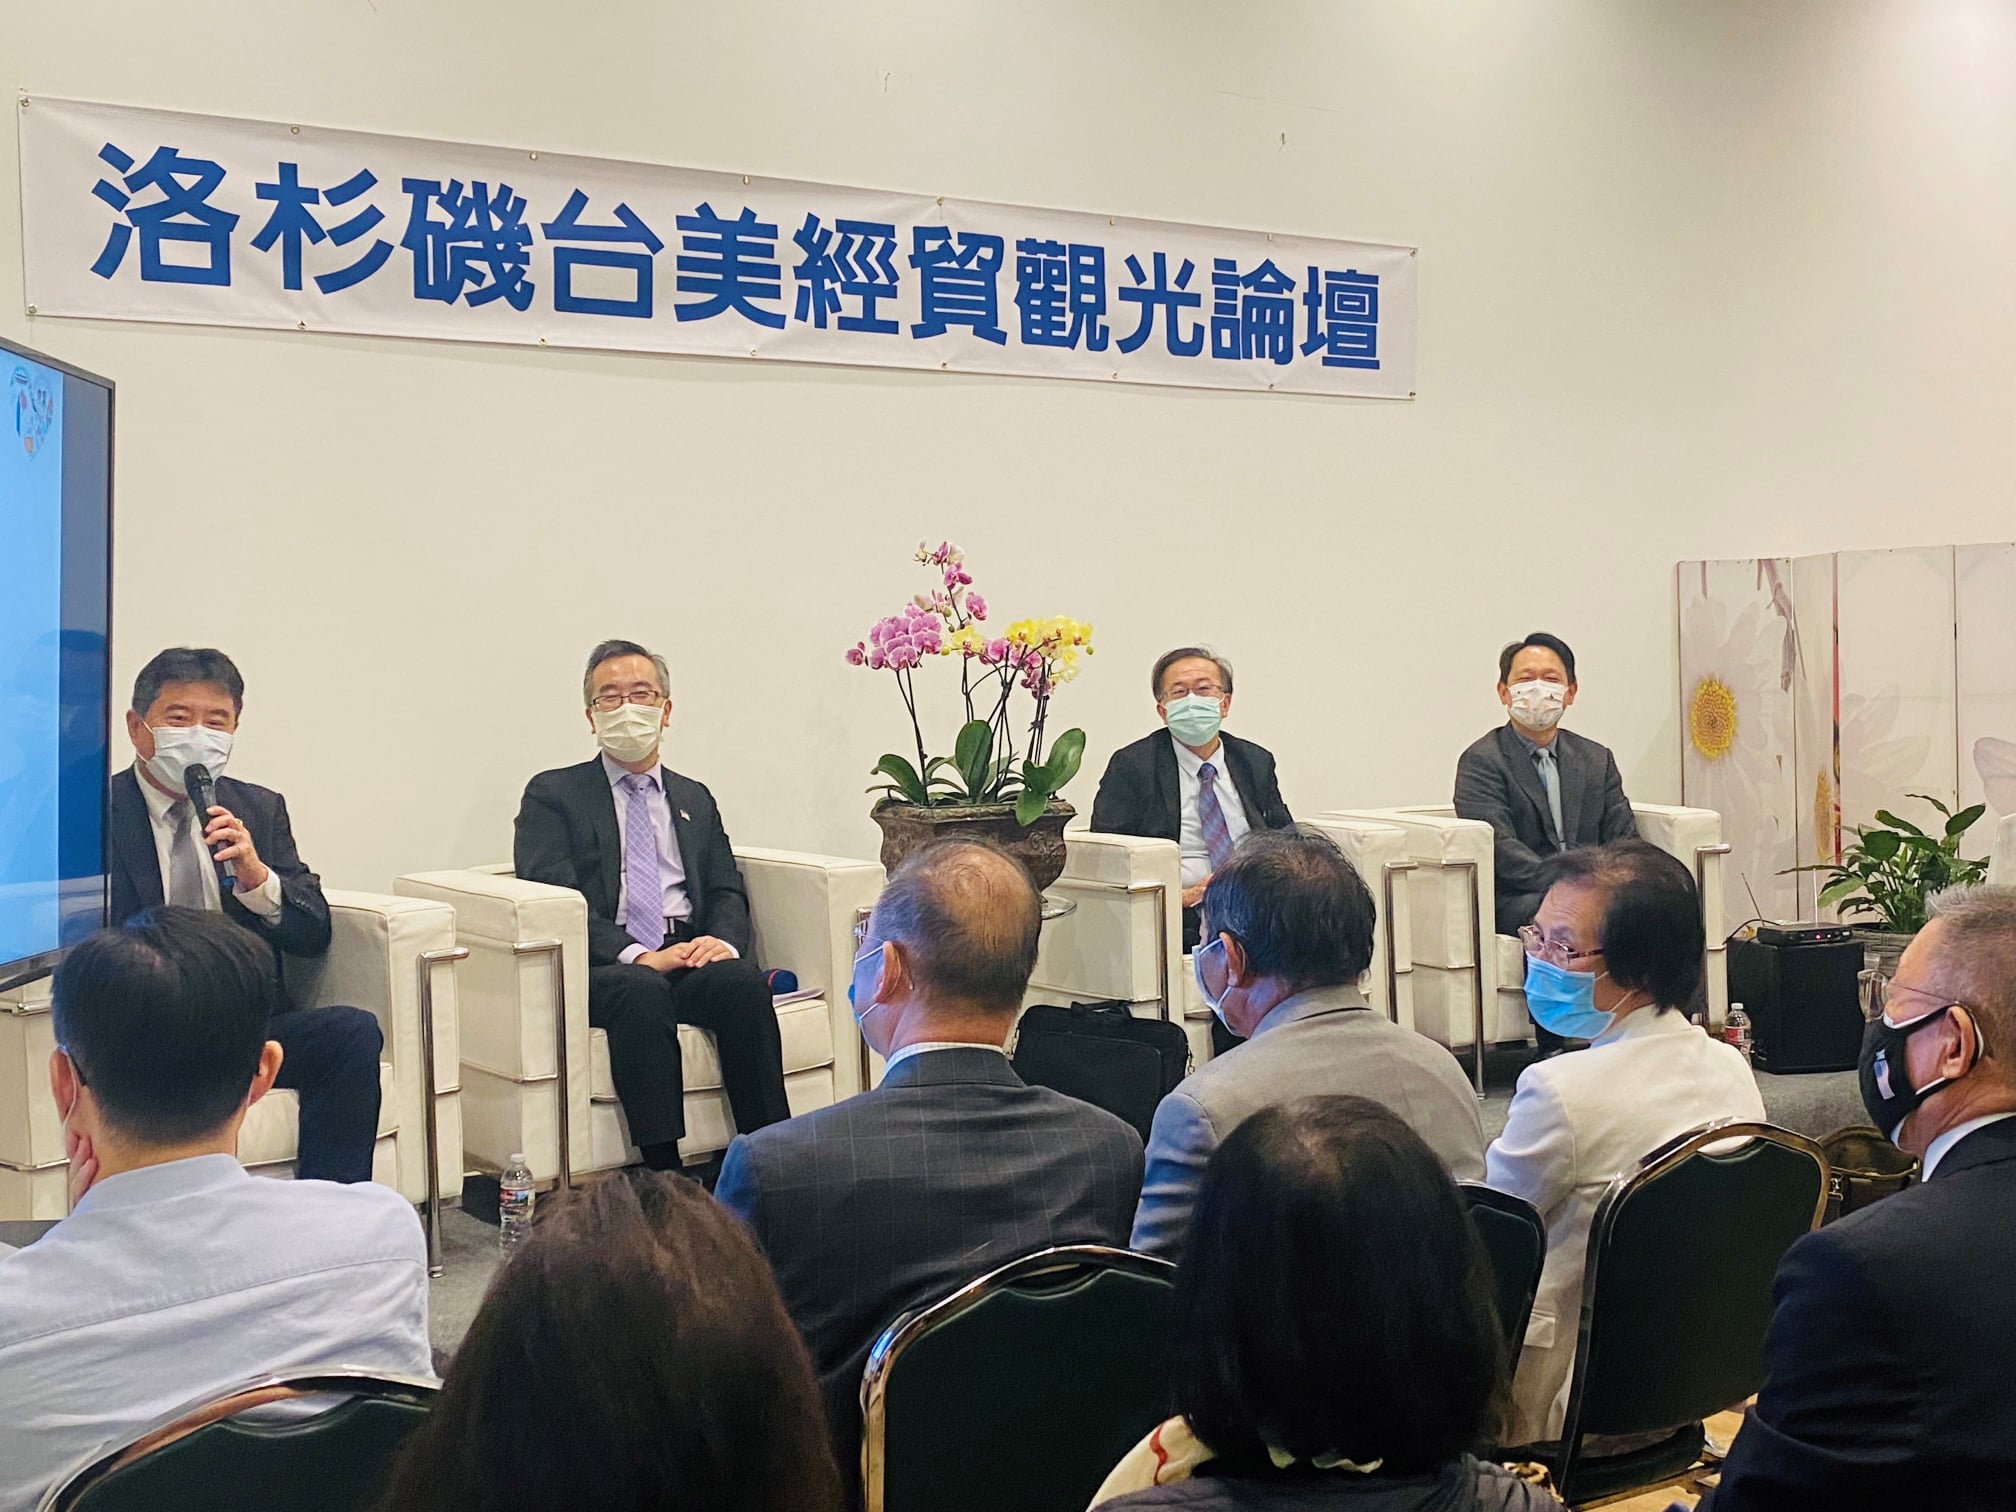 The deputy director of the Los Angeles office pointed out that Taiwan and the United States have a solid foundation for economic and trade exchanges. (Photo / Retrieved from the Facebook of Taipei Economic and Cultural Office in Los Angeles)